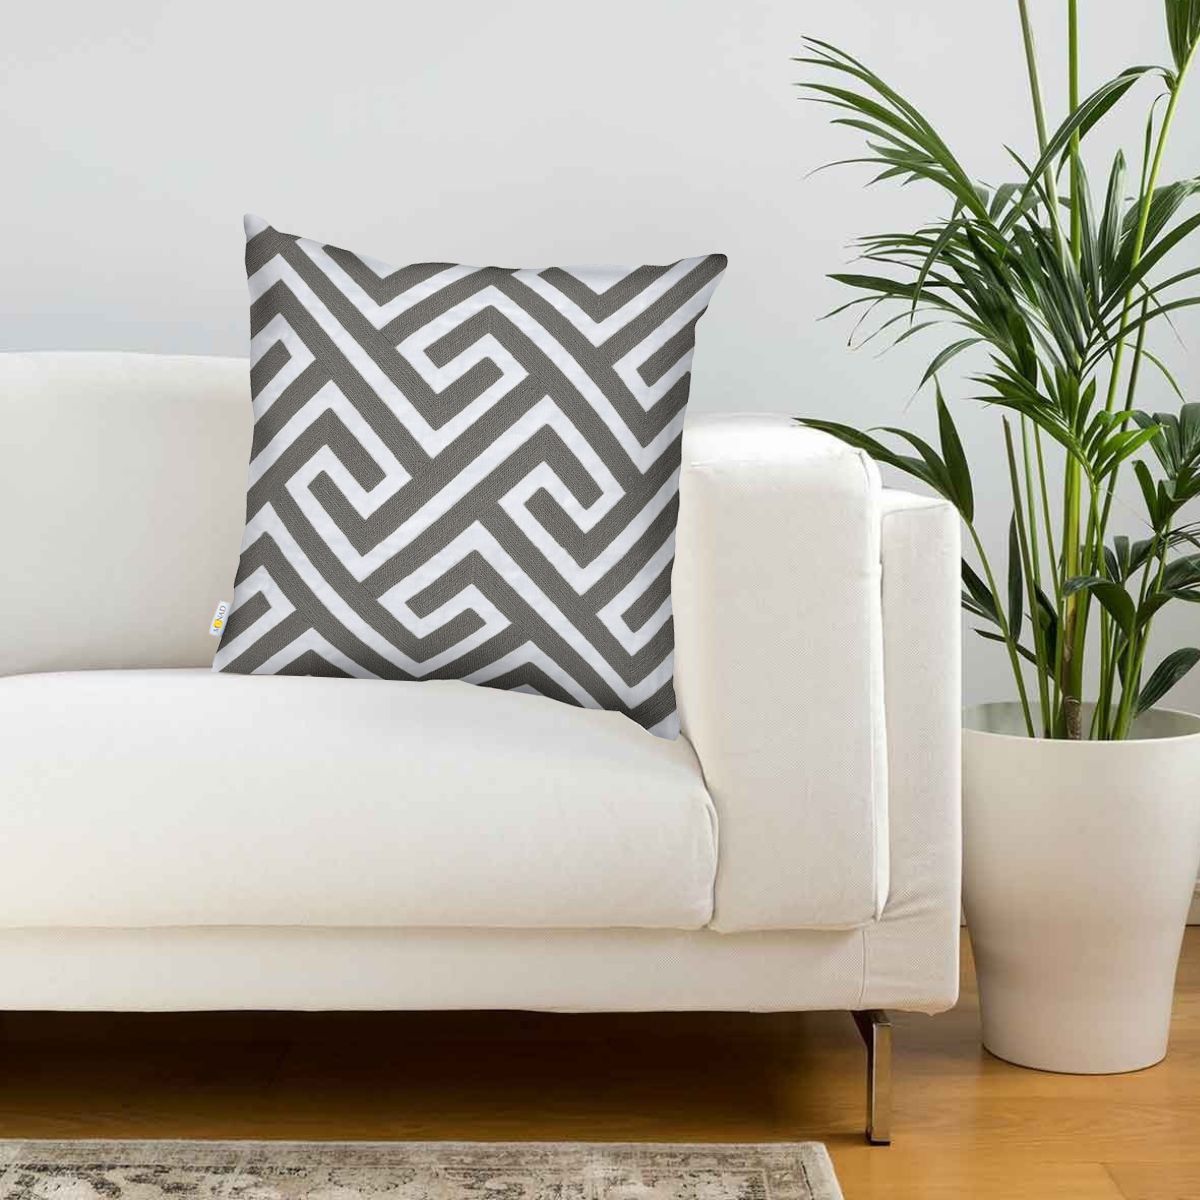 Grey And White Greek Key Style Cushion Cover